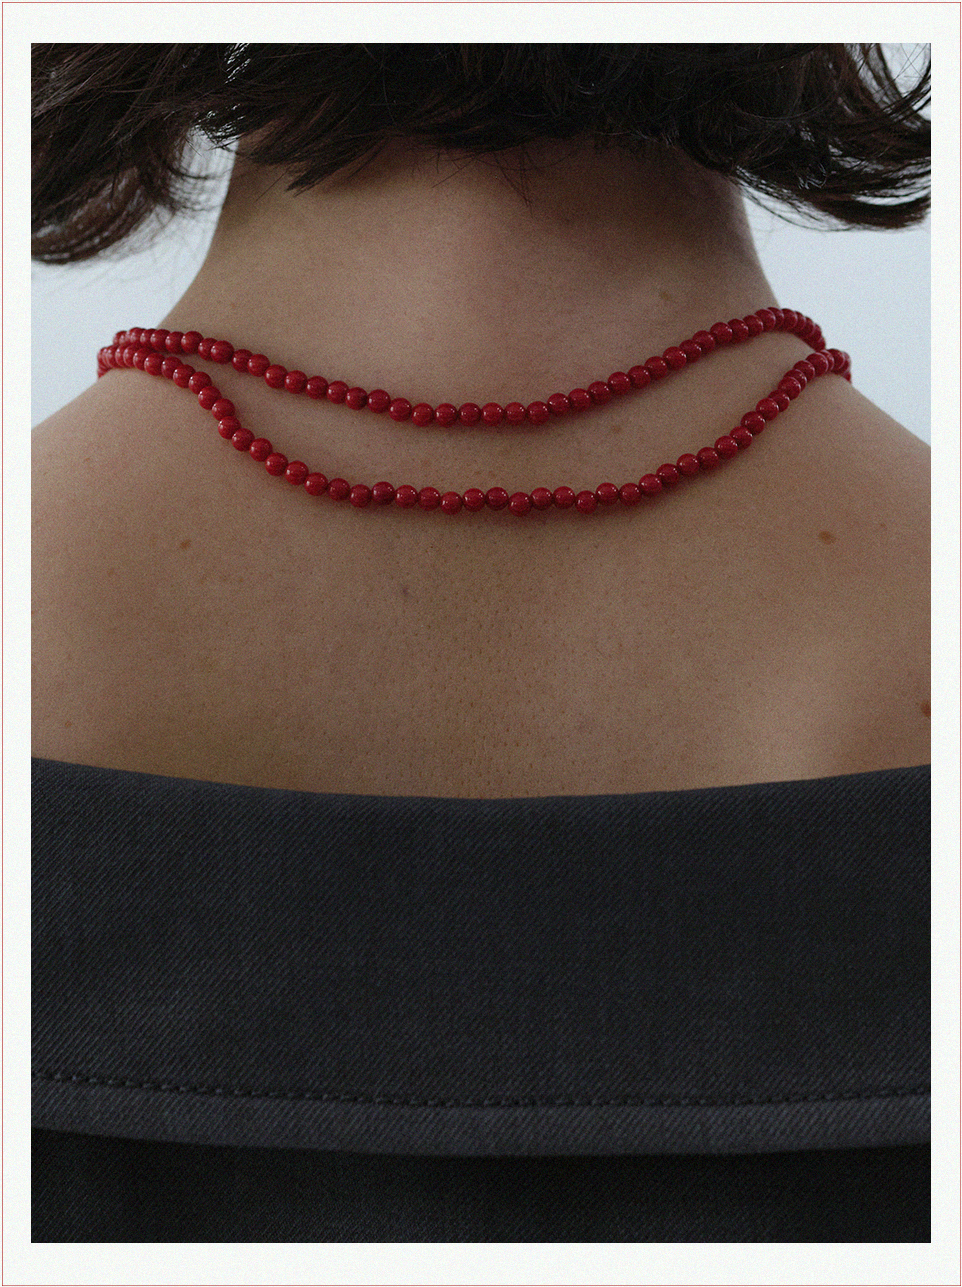 Red long necklace